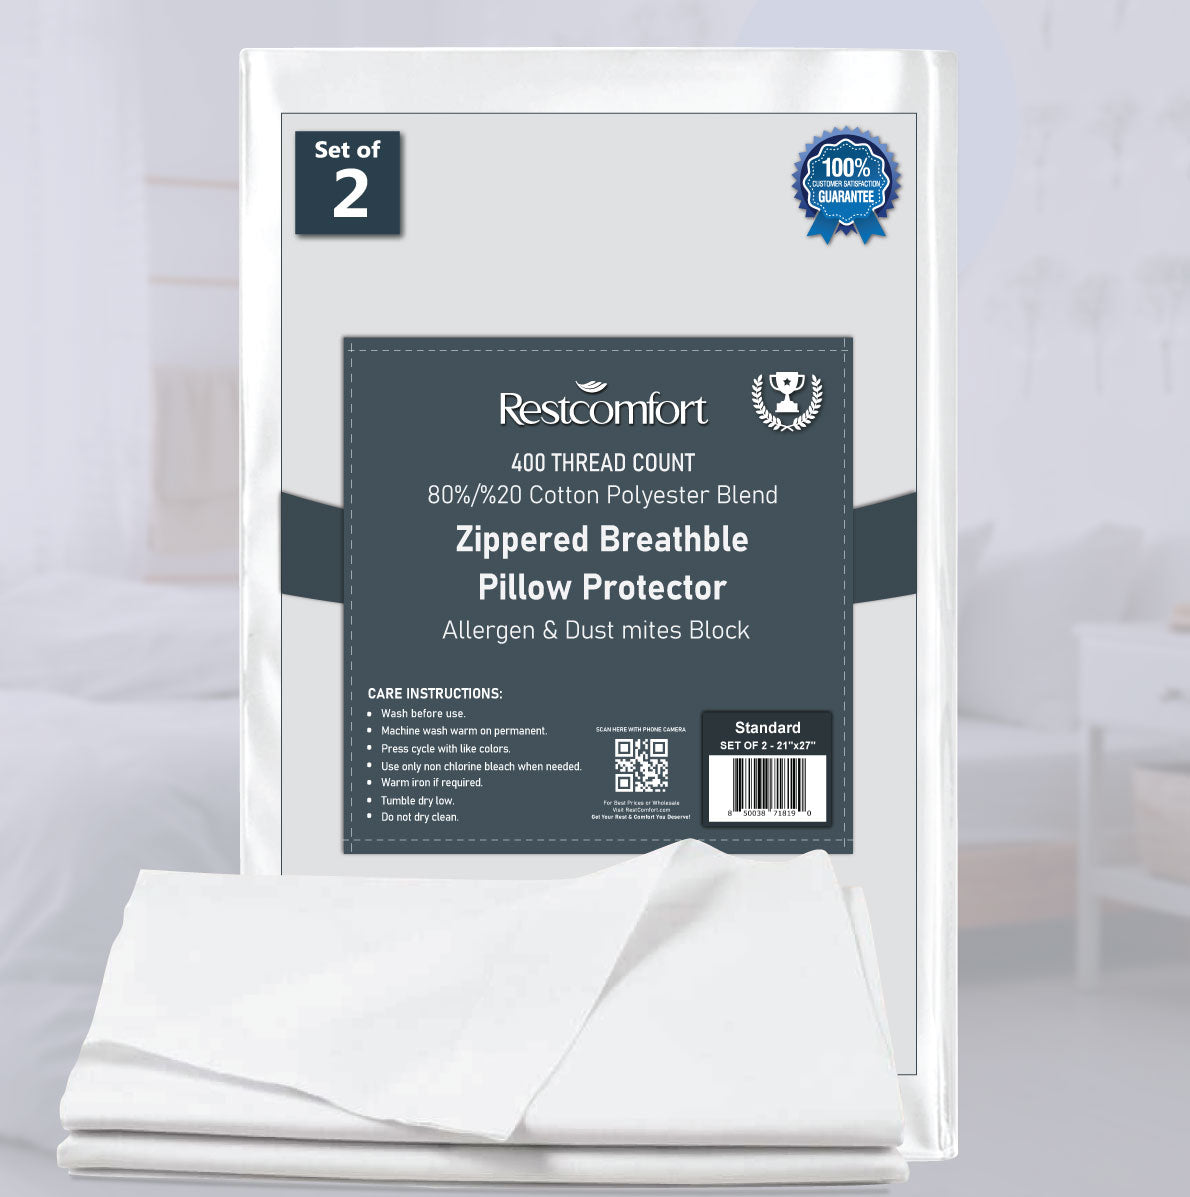 2 Pack Zippered Breathable Pillow Cases Protector, 400 TC 80% Cotton 20% Polyester Blend, Allergen & Dust Mites Block